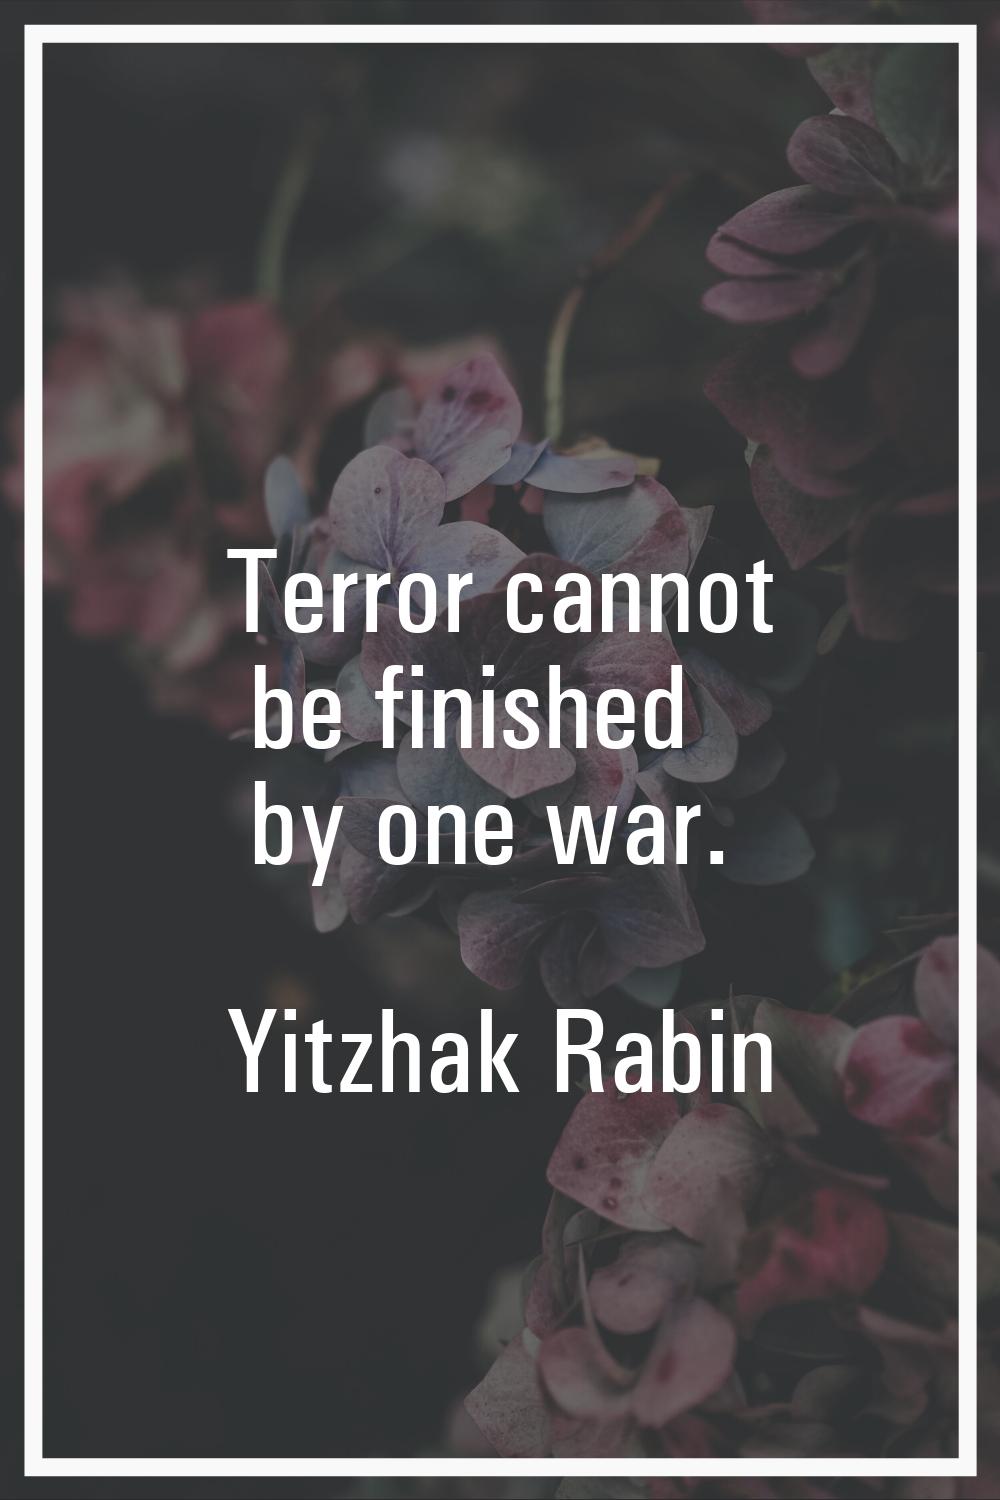 Terror cannot be finished by one war.